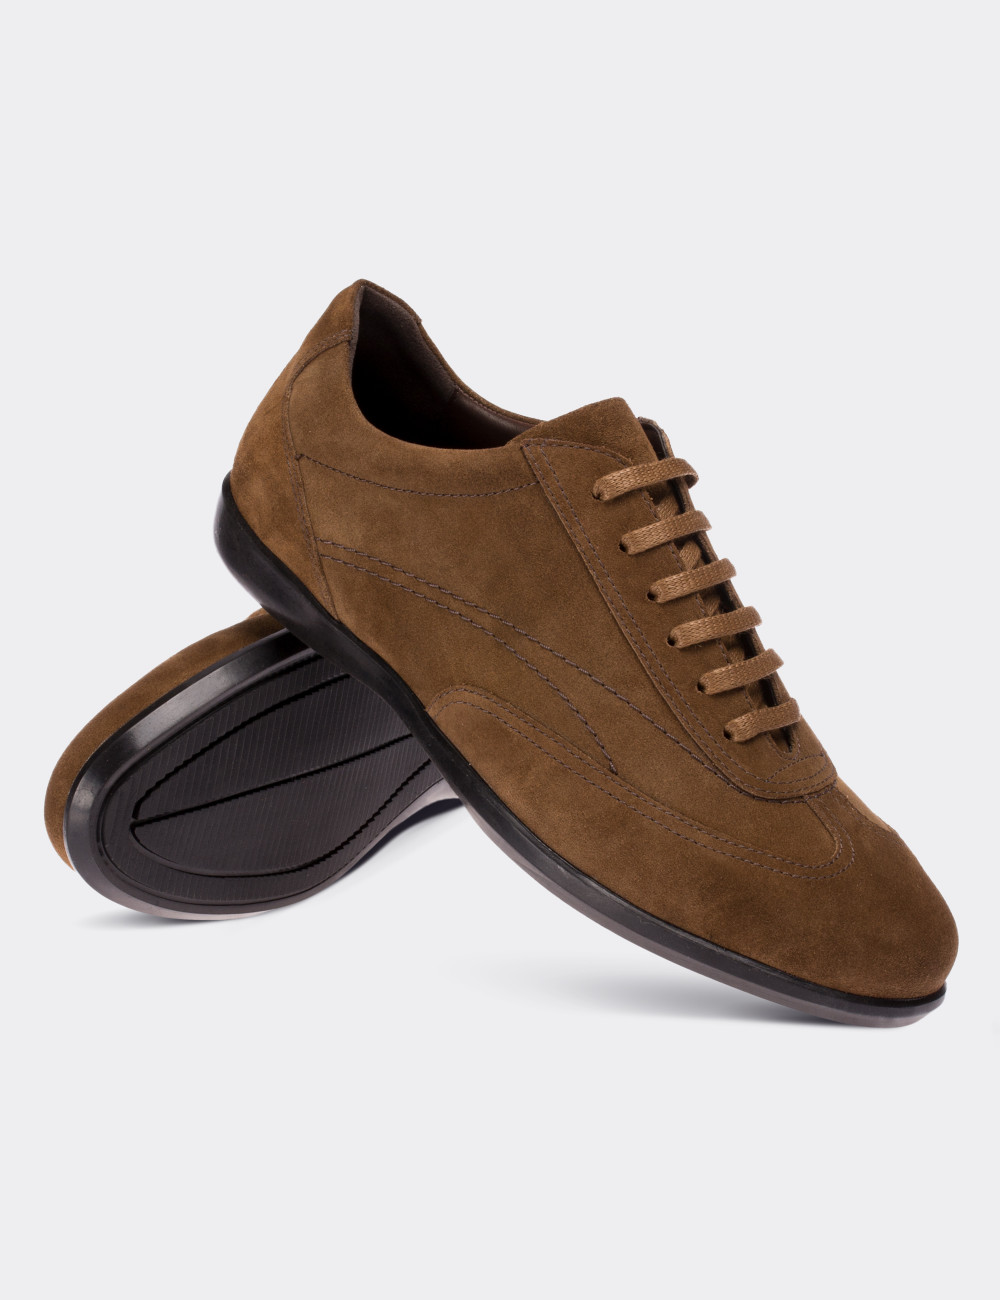 Tan Suede Leather Lace-up Shoes - 00321MTBAC02